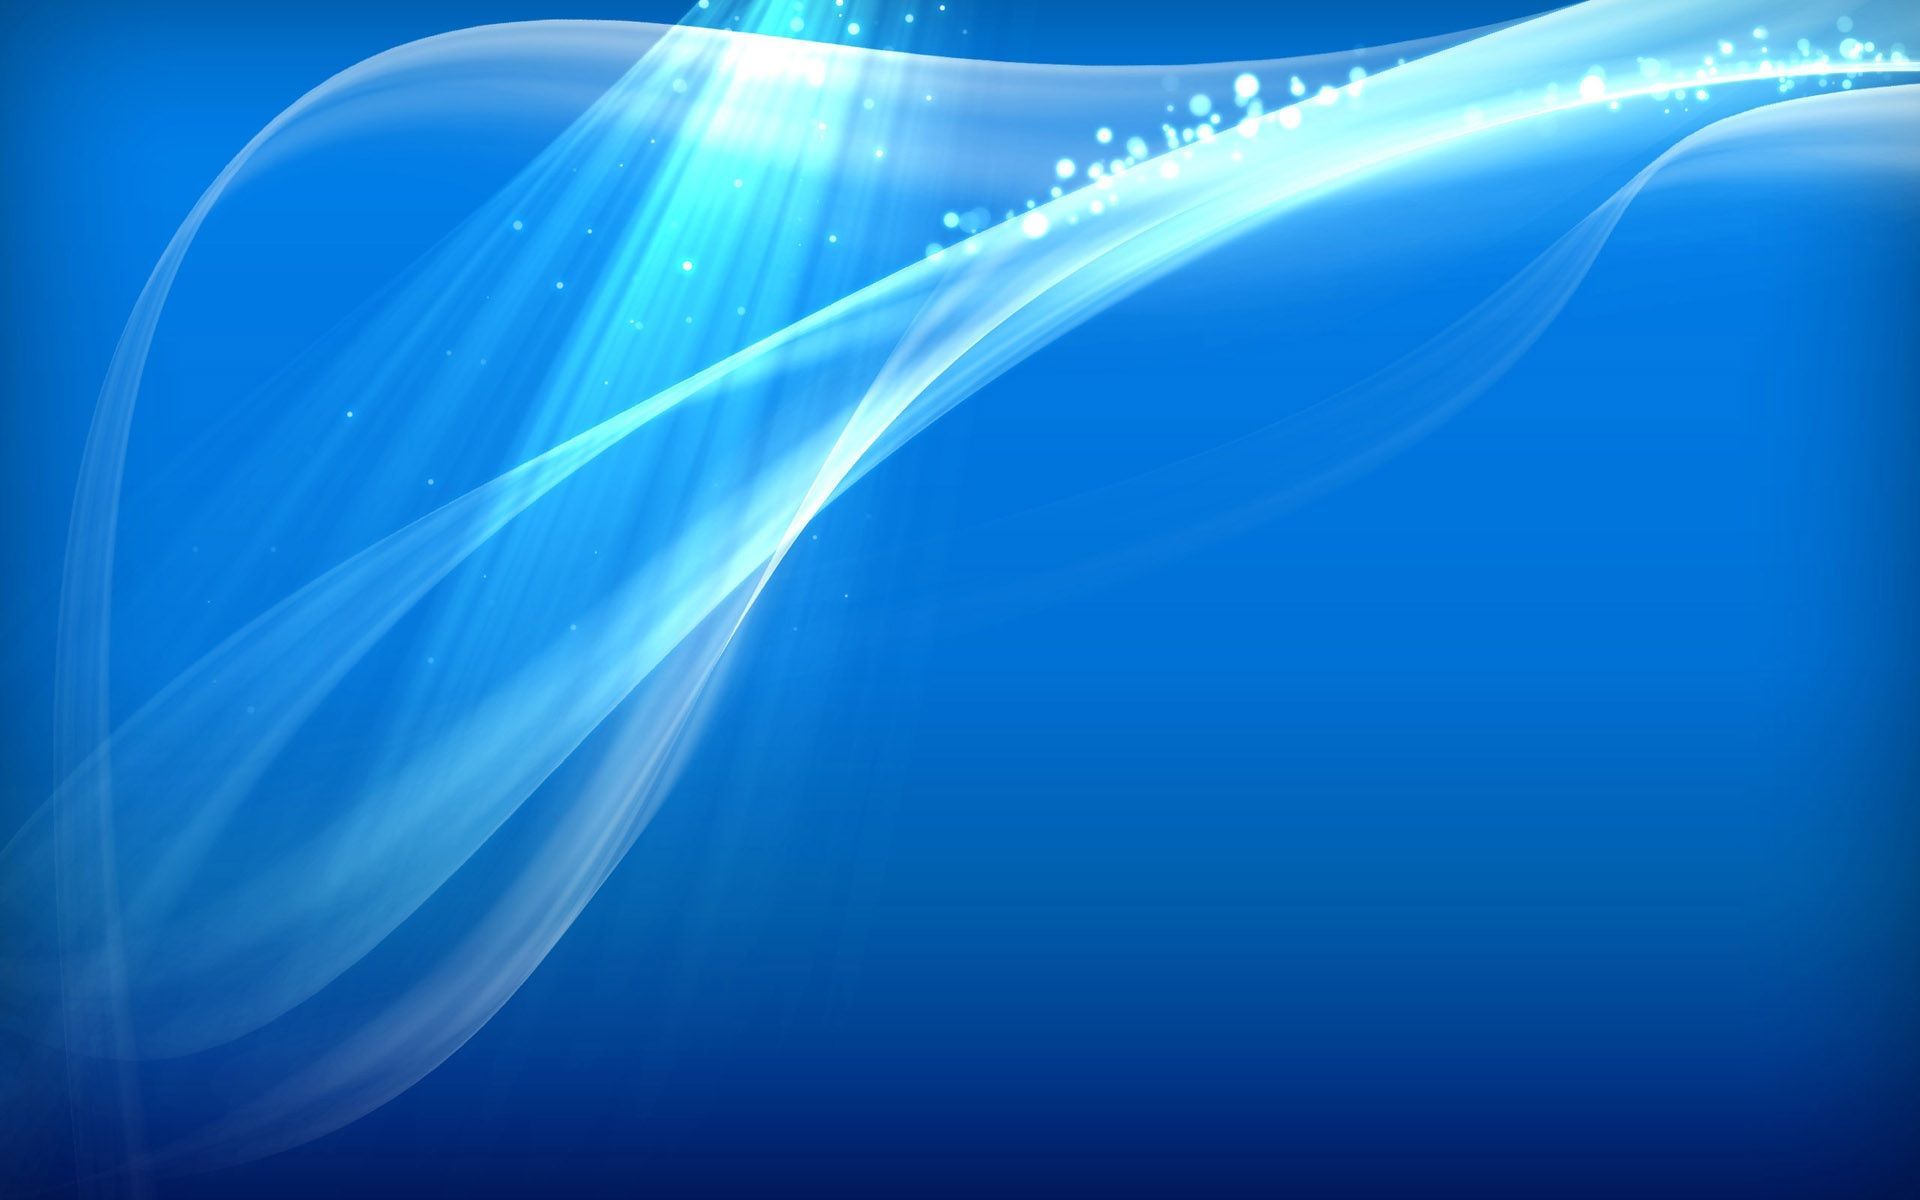 Wallpapers, Backgrounds, Images: Backgrounds Blue